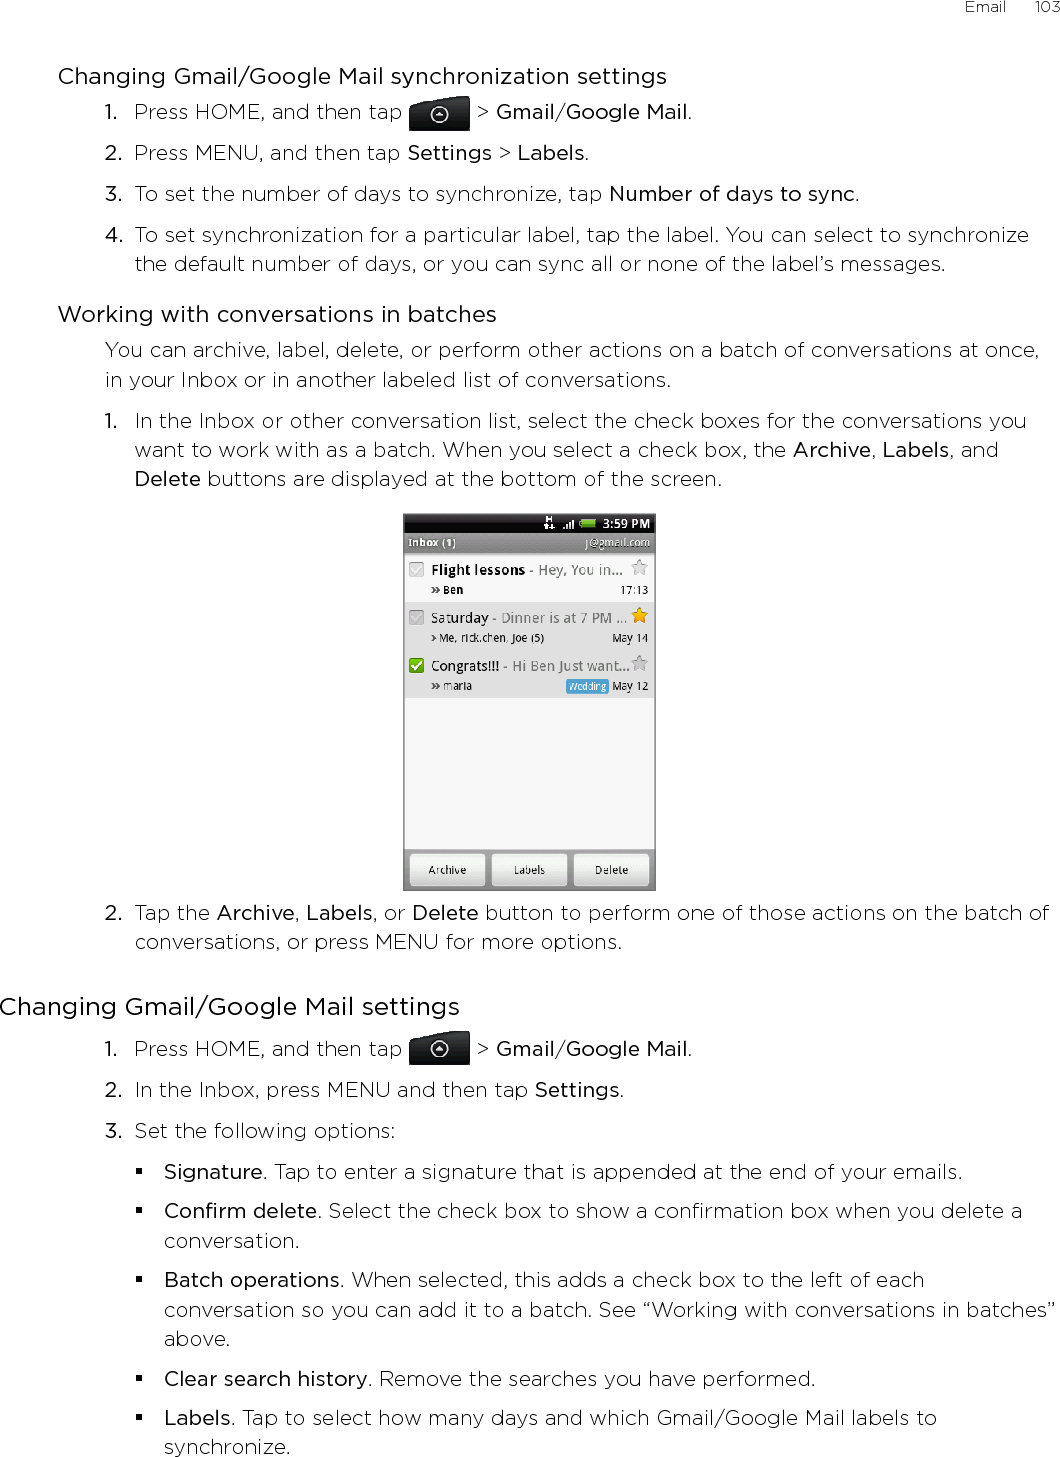 Email      103Changing Gmail/Google Mail synchronization settings1.  Press HOME, and then tap   &gt; Gmail/Google Mail. 2.  Press MENU, and then tap Settings &gt; Labels.3.  To set the number of days to synchronize, tap Number of days to sync.4.  To set synchronization for a particular label, tap the label. You can select to synchronize the default number of days, or you can sync all or none of the label’s messages.Working with conversations in batchesYou can archive, label, delete, or perform other actions on a batch of conversations at once, in your Inbox or in another labeled list of conversations.1.  In the Inbox or other conversation list, select the check boxes for the conversations you want to work with as a batch. When you select a check box, the Archive, Labels, and Delete buttons are displayed at the bottom of the screen.2.  Tap the Archive, Labels, or Delete button to perform one of those actions on the batch of conversations, or press MENU for more options.Changing Gmail/Google Mail settings1.  Press HOME, and then tap   &gt; Gmail/Google Mail.2.  In the Inbox, press MENU and then tap Settings.3.  Set the following options: Signature. Tap to enter a signature that is appended at the end of your emails. Confirm delete. Select the check box to show a confirmation box when you delete a conversation.Batch operations. When selected, this adds a check box to the left of each conversation so you can add it to a batch. See “Working with conversations in batches” above. Clear search history. Remove the searches you have performed.Labels. Tap to select how many days and which Gmail/Google Mail labels to synchronize.